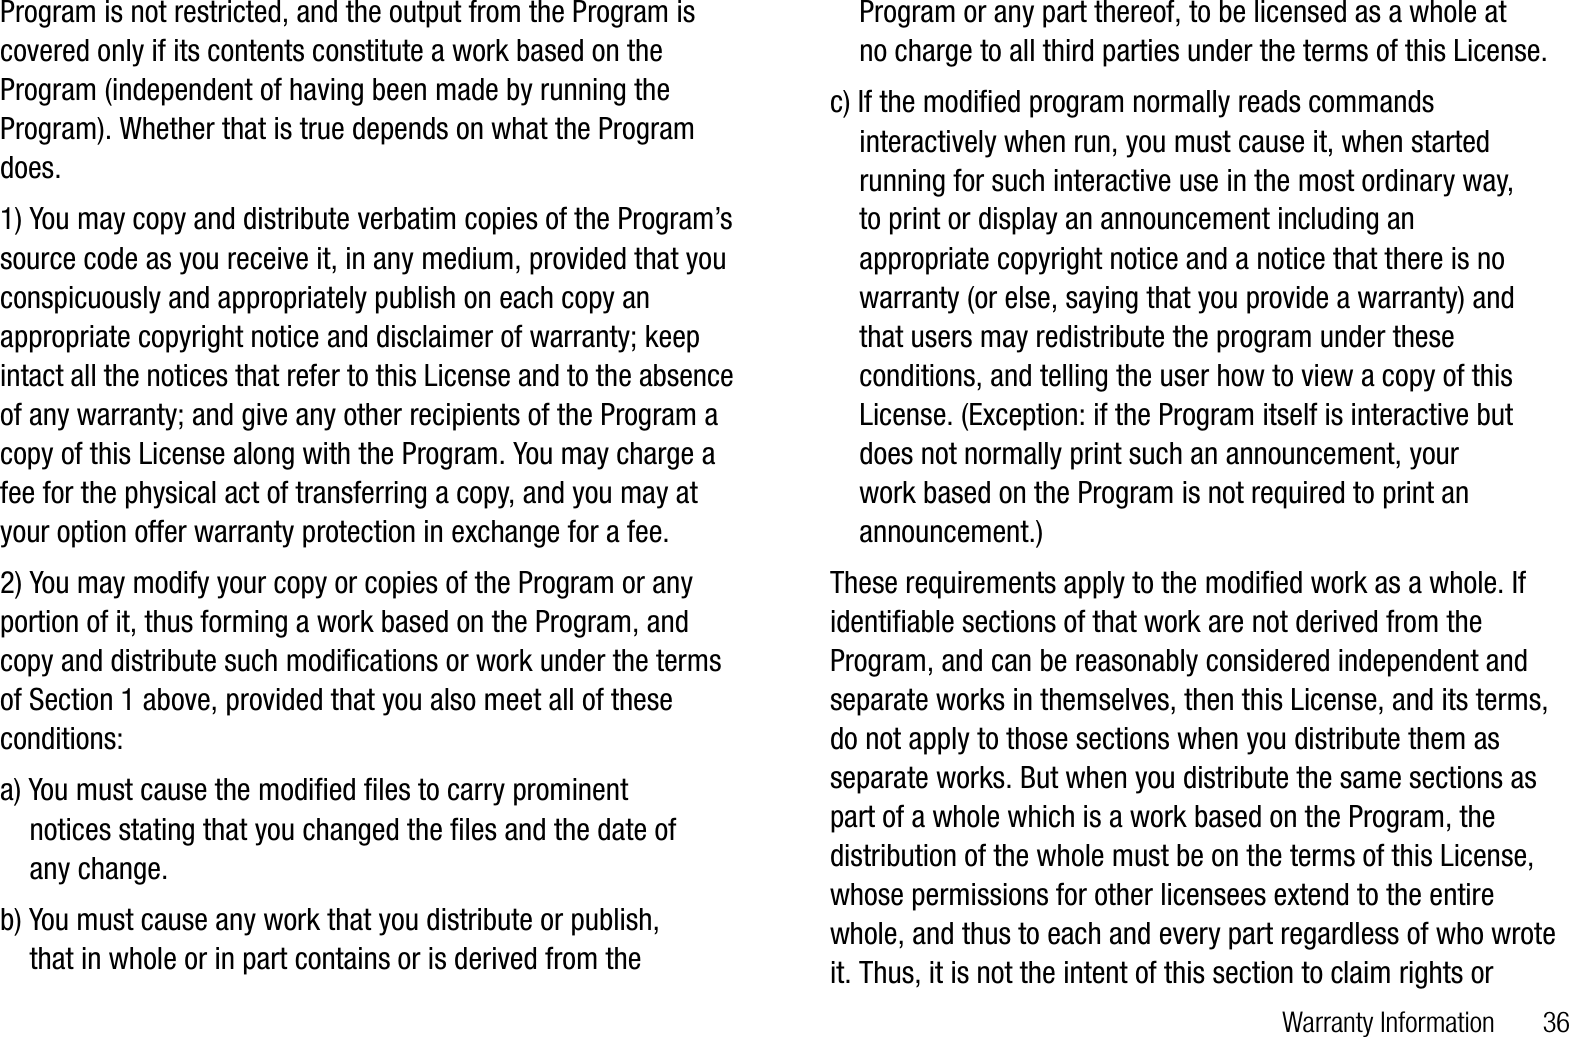 Warranty Information       36Program is not restricted, and the output from the Program is covered only if its contents constitute a work based on the Program (independent of having been made by running the Program). Whether that is true depends on what the Program does.1) You may copy and distribute verbatim copies of the Program’s source code as you receive it, in any medium, provided that you conspicuously and appropriately publish on each copy an appropriate copyright notice and disclaimer of warranty; keep intact all the notices that refer to this License and to the absence of any warranty; and give any other recipients of the Program a copy of this License along with the Program. You may charge a fee for the physical act of transferring a copy, and you may at your option offer warranty protection in exchange for a fee.2) You may modify your copy or copies of the Program or any portion of it, thus forming a work based on the Program, and copy and distribute such modifications or work under the terms of Section 1 above, provided that you also meet all of these conditions:a) You must cause the modified files to carry prominent     notices stating that you changed the files and the date of     any change. b) You must cause any work that you distribute or publish,     that in whole or in part contains or is derived from the    Program or any part thereof, to be licensed as a whole at     no charge to all third parties under the terms of this License.c) If the modified program normally reads commands    interactively when run, you must cause it, when started    running for such interactive use in the most ordinary way,     to print or display an announcement including an    appropriate copyright notice and a notice that there is no    warranty (or else, saying that you provide a warranty) and    that users may redistribute the program under these    conditions, and telling the user how to view a copy of this    License. (Exception: if the Program itself is interactive but    does not normally print such an announcement, your     work based on the Program is not required to print an    announcement.)These requirements apply to the modified work as a whole. If identifiable sections of that work are not derived from the Program, and can be reasonably considered independent and separate works in themselves, then this License, and its terms, do not apply to those sections when you distribute them as separate works. But when you distribute the same sections as part of a whole which is a work based on the Program, the distribution of the whole must be on the terms of this License, whose permissions for other licensees extend to the entire whole, and thus to each and every part regardless of who wrote it. Thus, it is not the intent of this section to claim rights or 